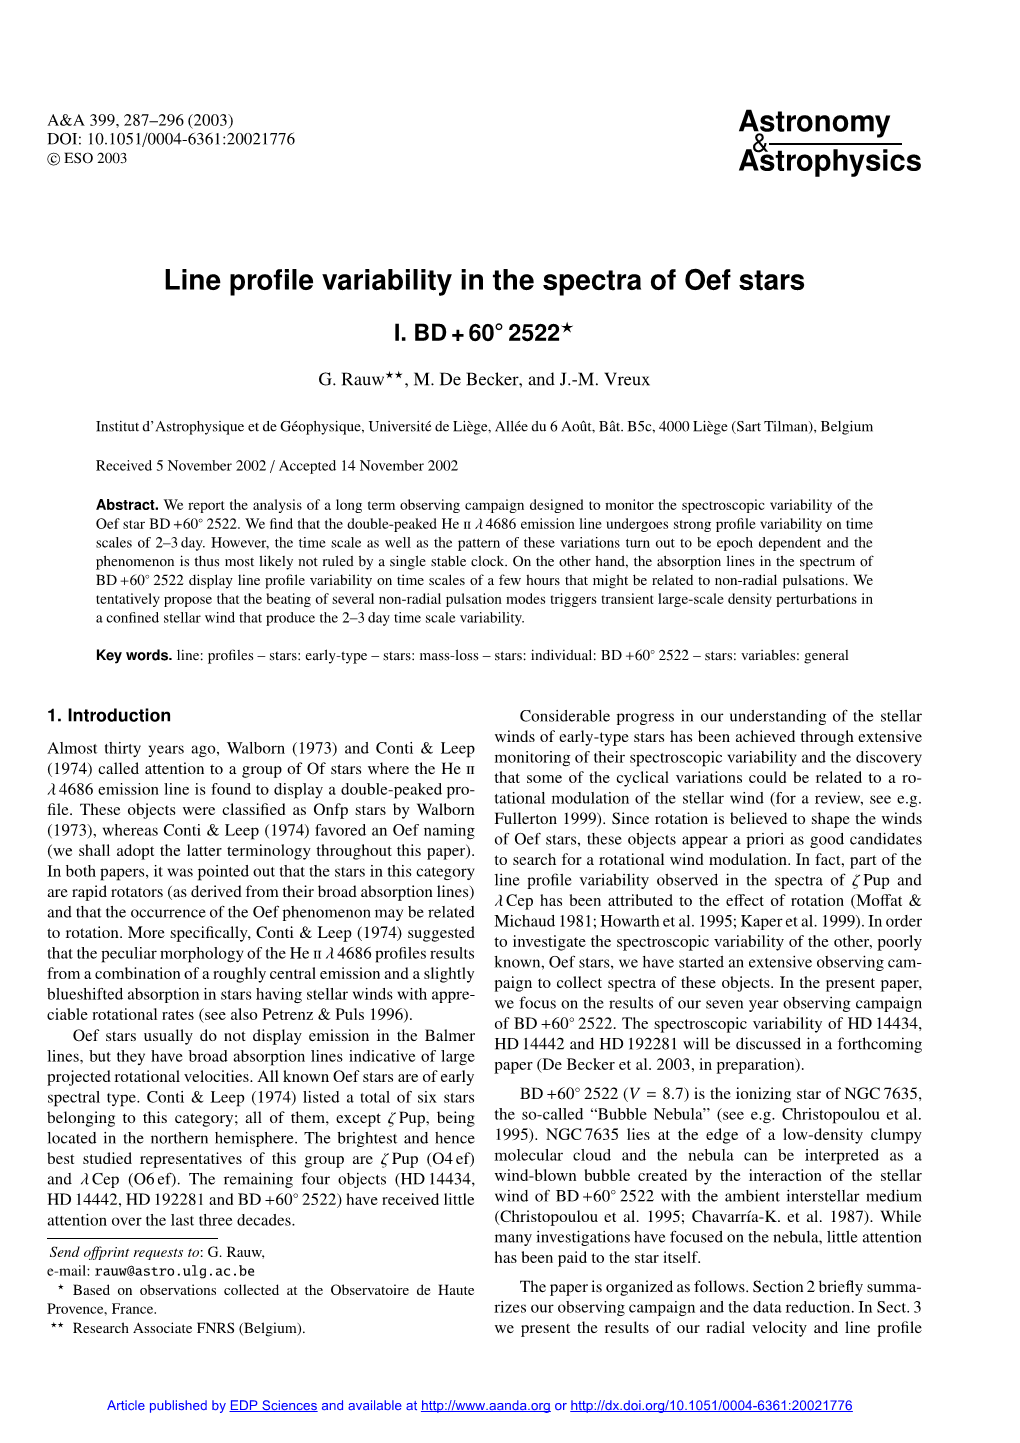 Line Profile Variability in the Spectra of Oef Stars